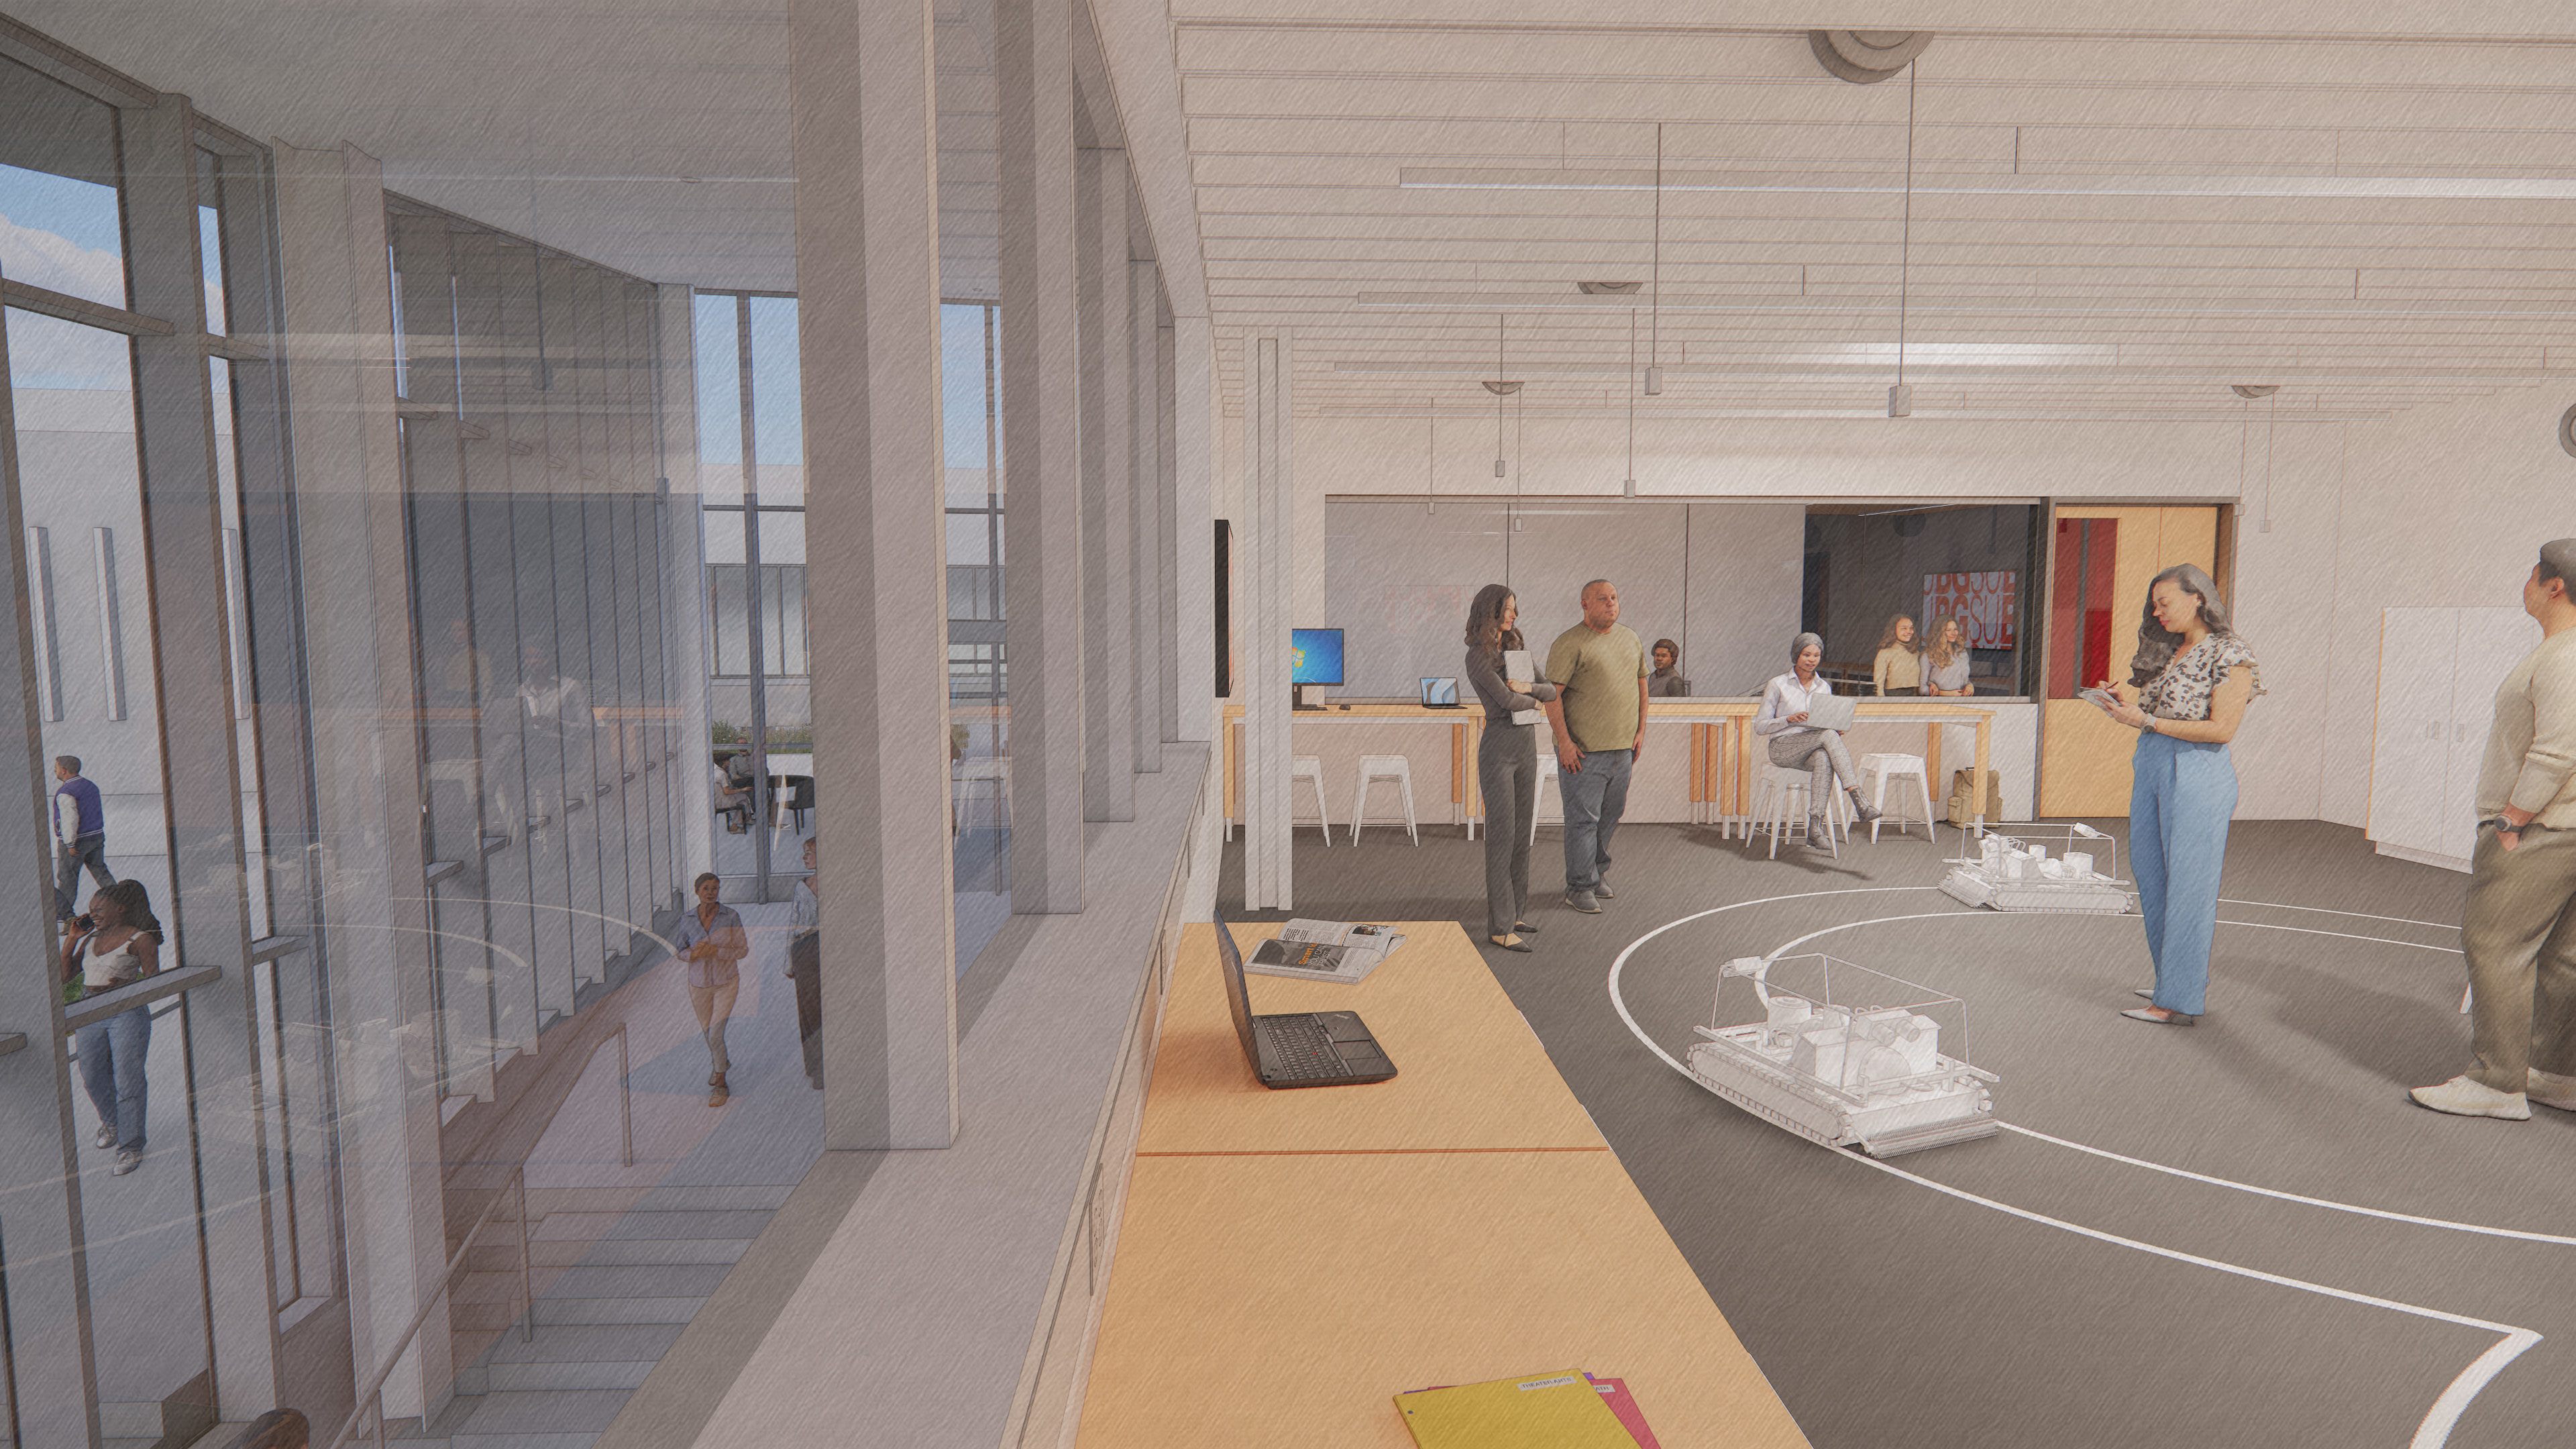 An artist's rendering of an experiential learning space in the BGSU Technology Engineering Innovation Center.